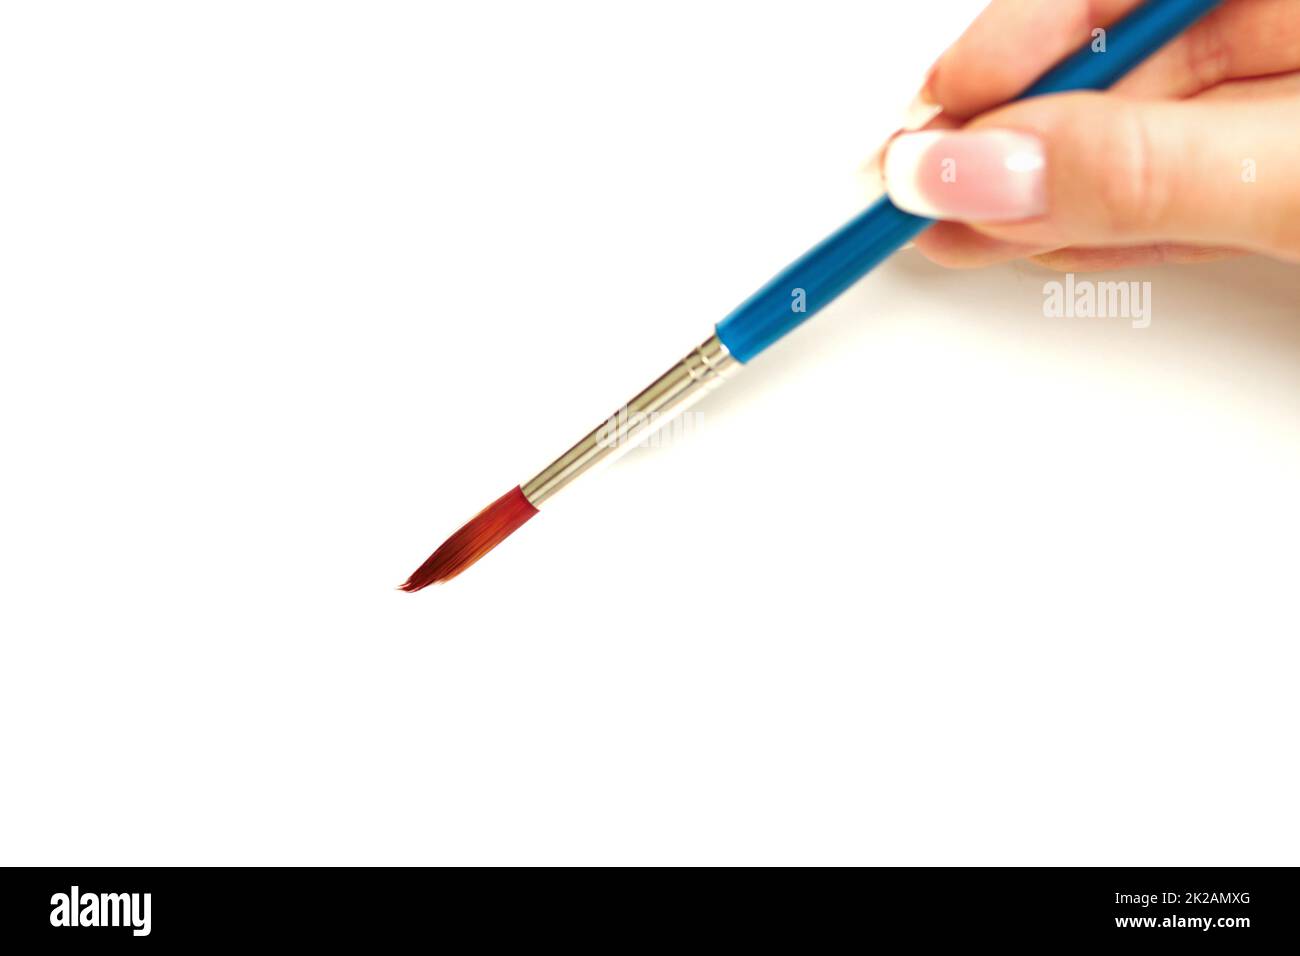 https://c8.alamy.com/comp/2K2AMXG/an-artists-delight-close-up-shot-of-a-female-hand-holding-a-paintbrush-white-background-2K2AMXG.jpg